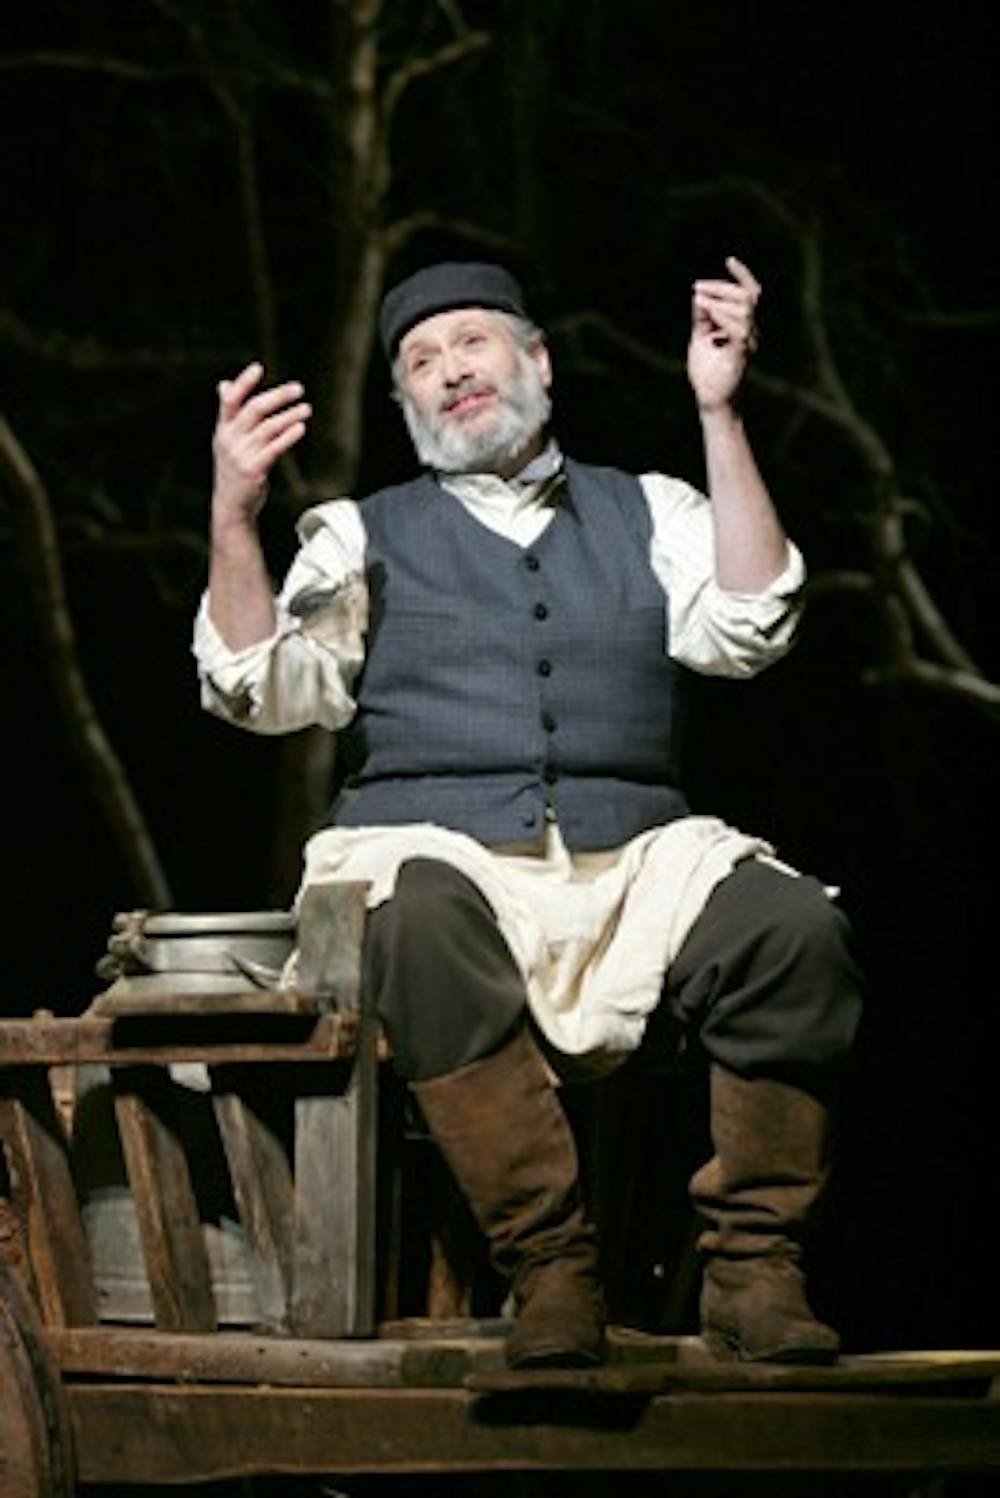 THE ROOF IS ON FIERSTEIN â€” Broadway star Harvey Fierstein is bringing his experience and prestige to D.C.â€™s National Theatre in his role as Tevye in â€œFiddler on the Roof.â€ The musical runs through May 2.